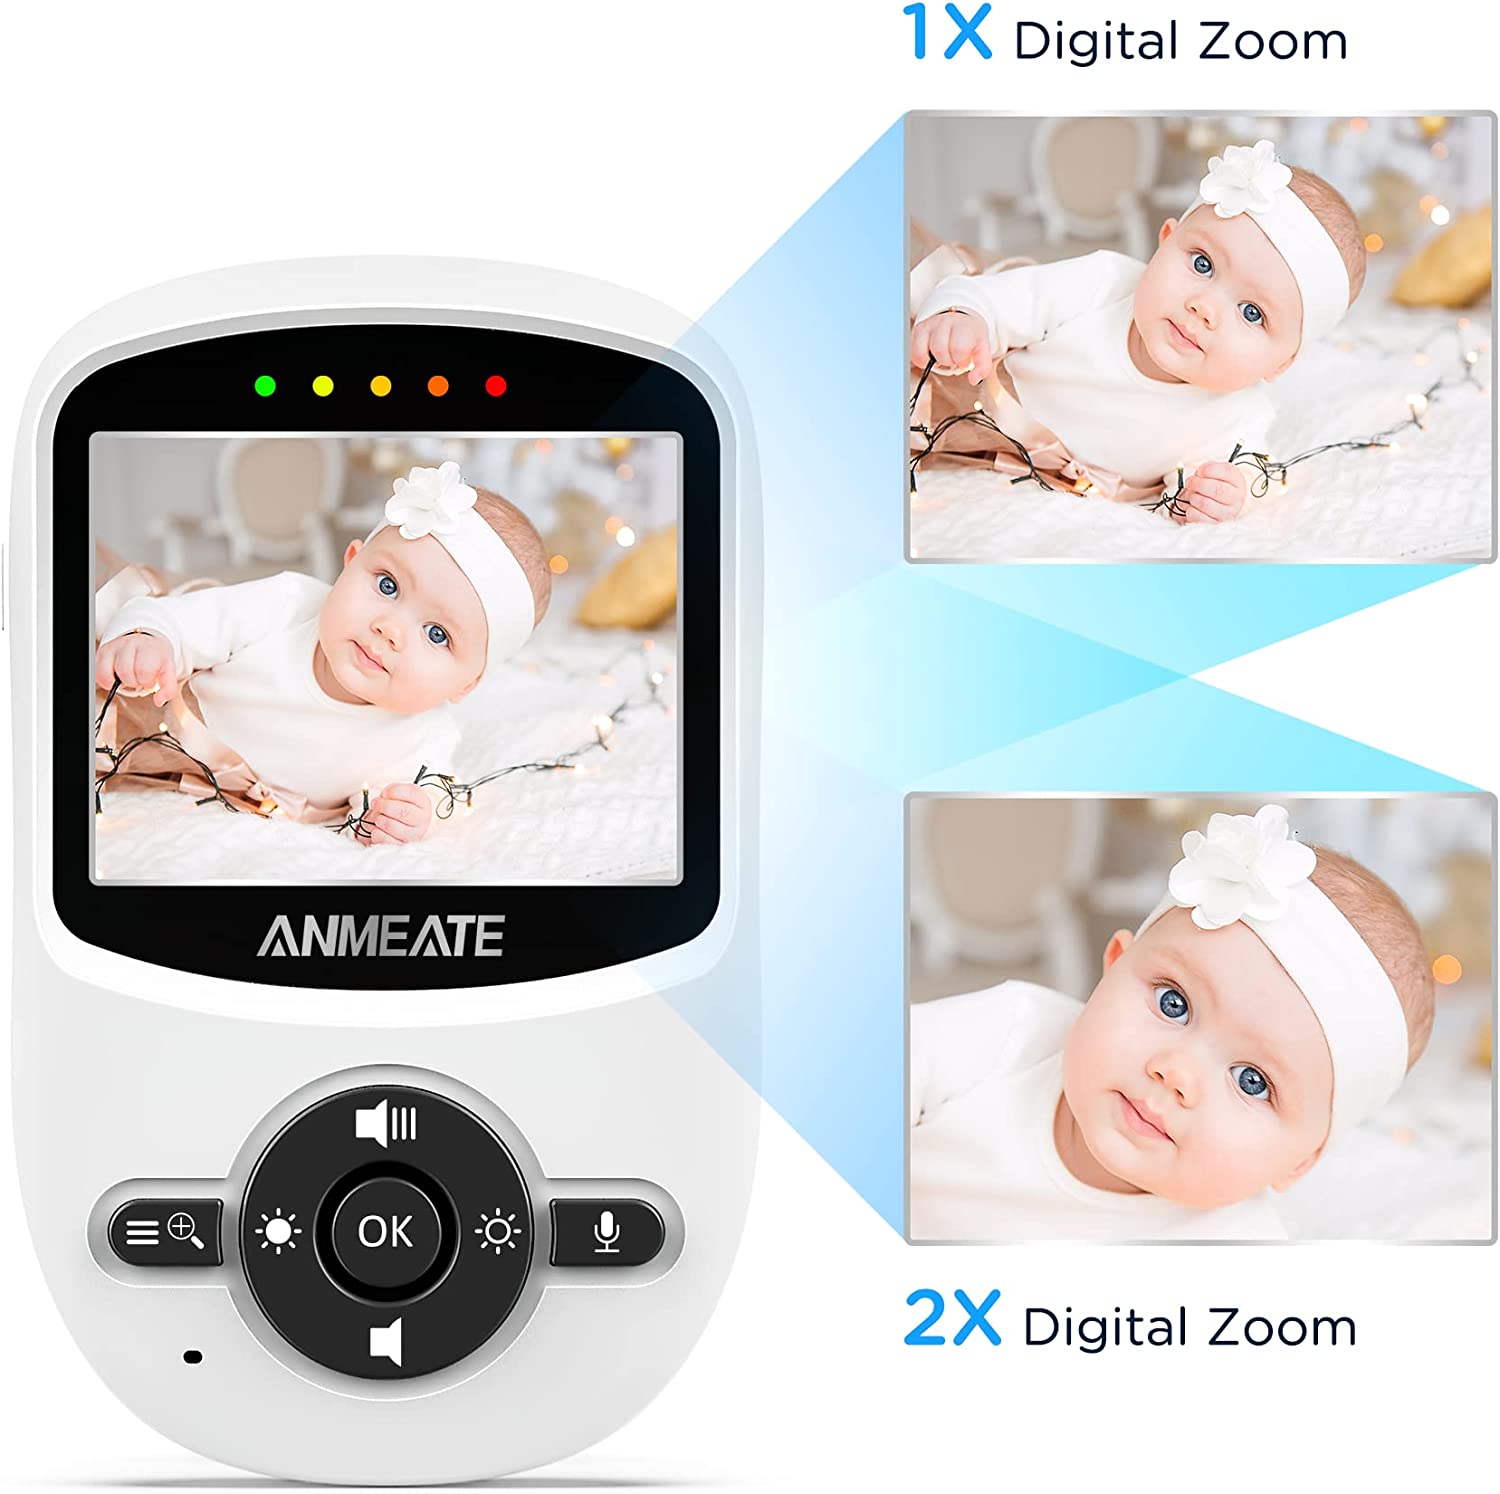 ANMEATE Video Baby Monitor with Digital Camera, Digital 2.4Ghz Wireless Video Monitor with Temperature Monitor, 960ft Transmission Range, 2-Way Talk, Night Vision, High Capacity Battery (2.4inch) SM - image 3 of 7